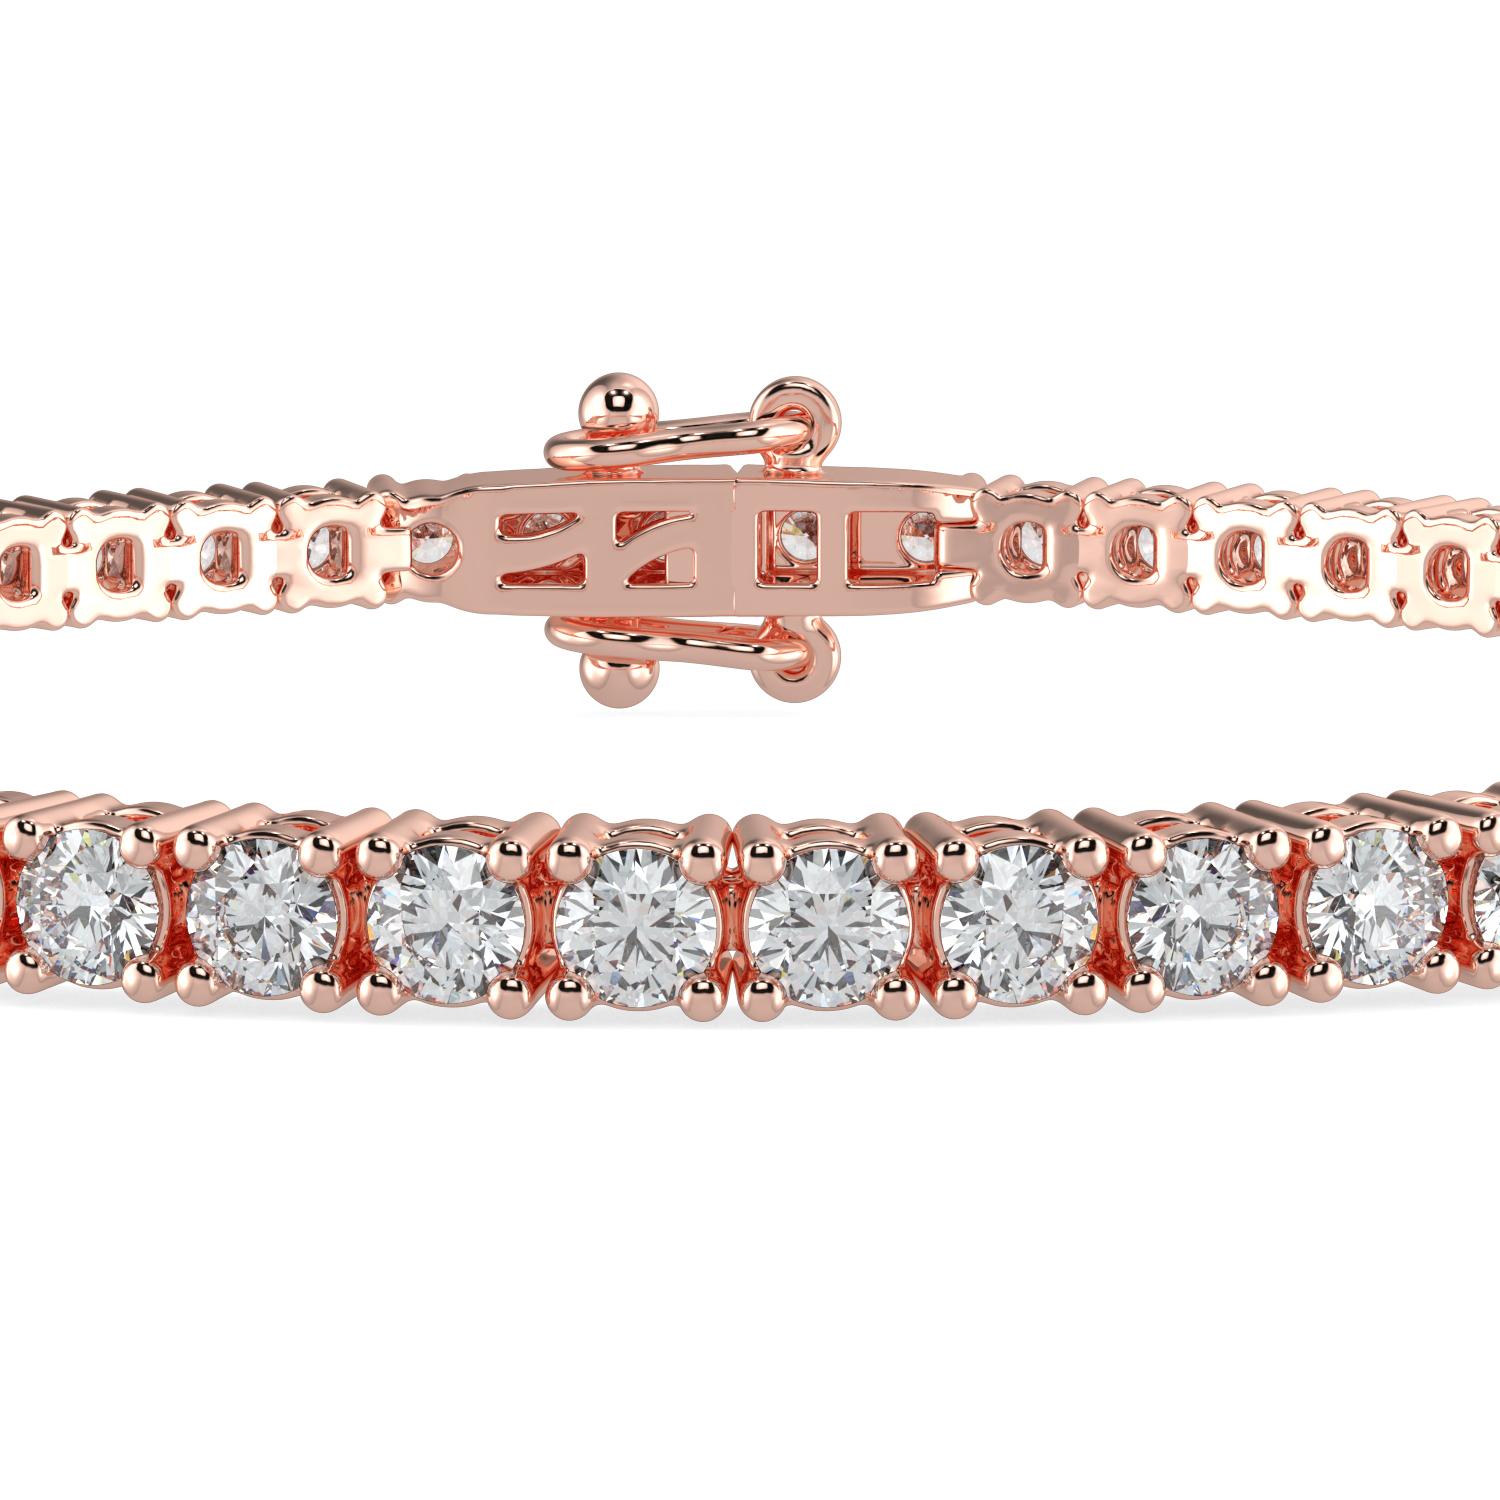 10.00 Carat Round Cut GH-I1 Natural Diamond Classic Tennis Bracelet 4 Prong 14K Rose Gold for Women

Specification
Brand: AAMIAA
Length: 7 Inches 
Color: GH
Carat Weight:10.00CTW
Clarity: I1

LUXURIOUS AND LASTING- Our bracelets are a luxurious and